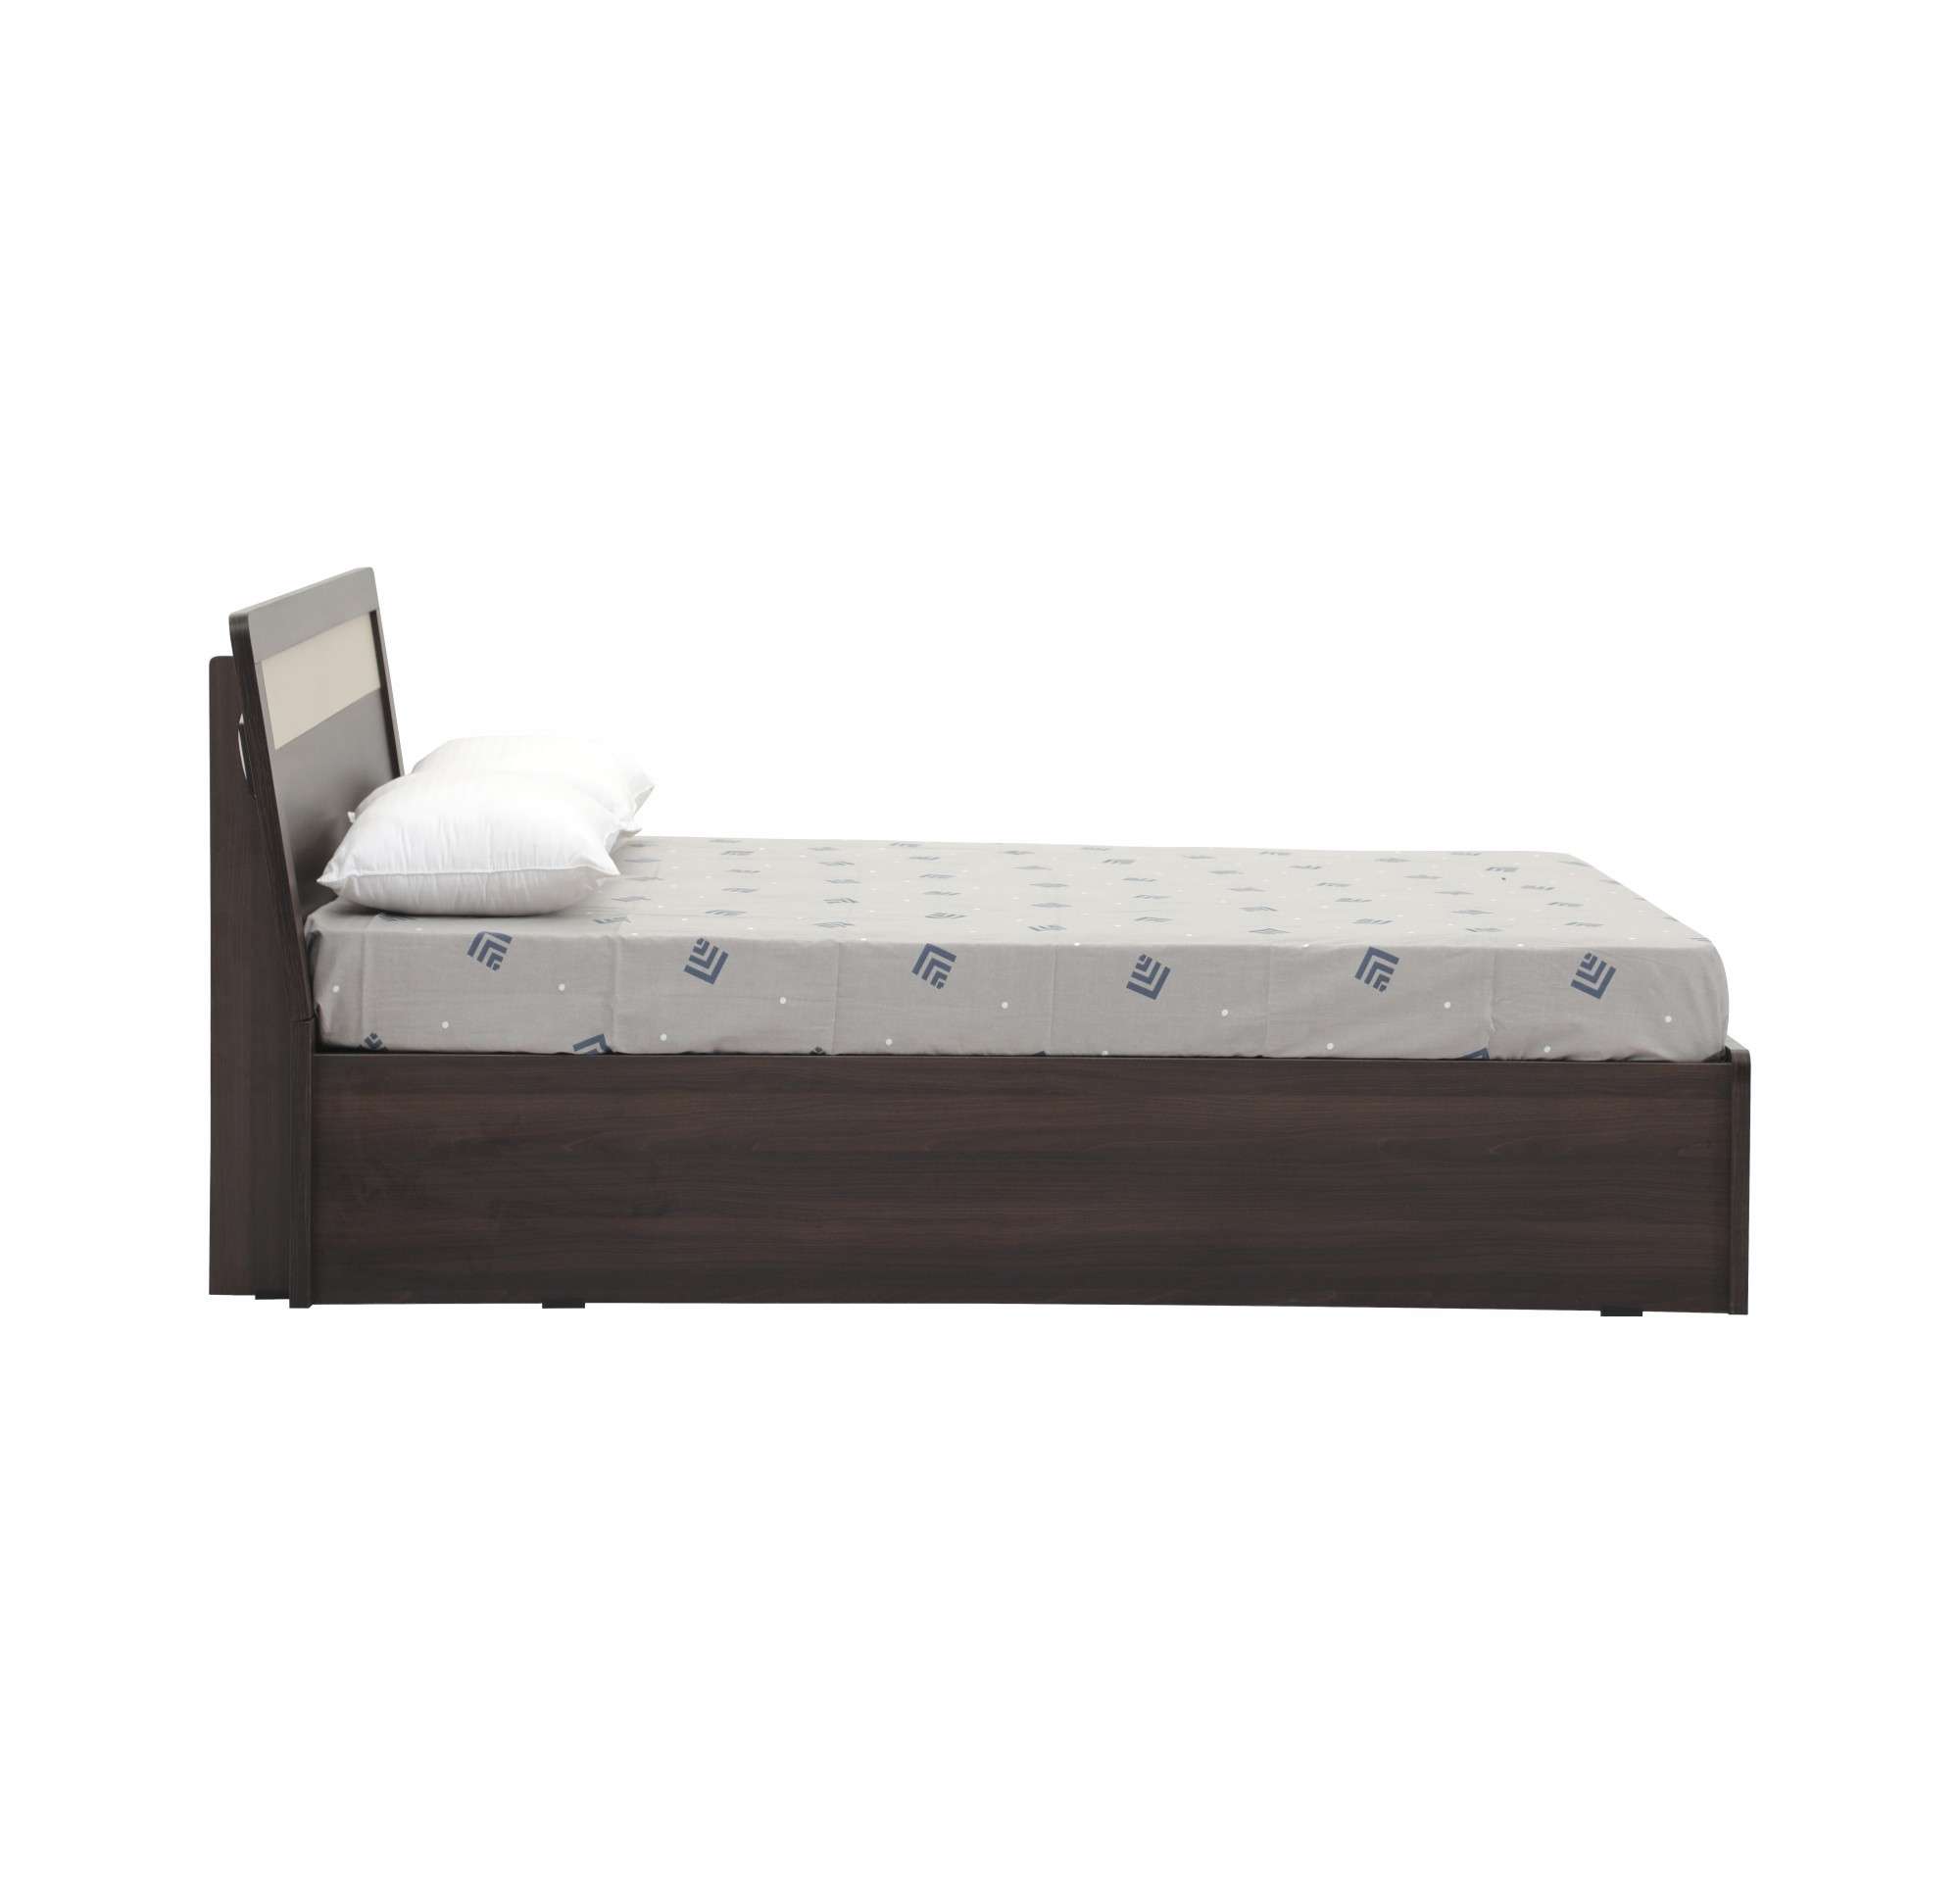 KBS035-KD Bed With Storage-M42/M50